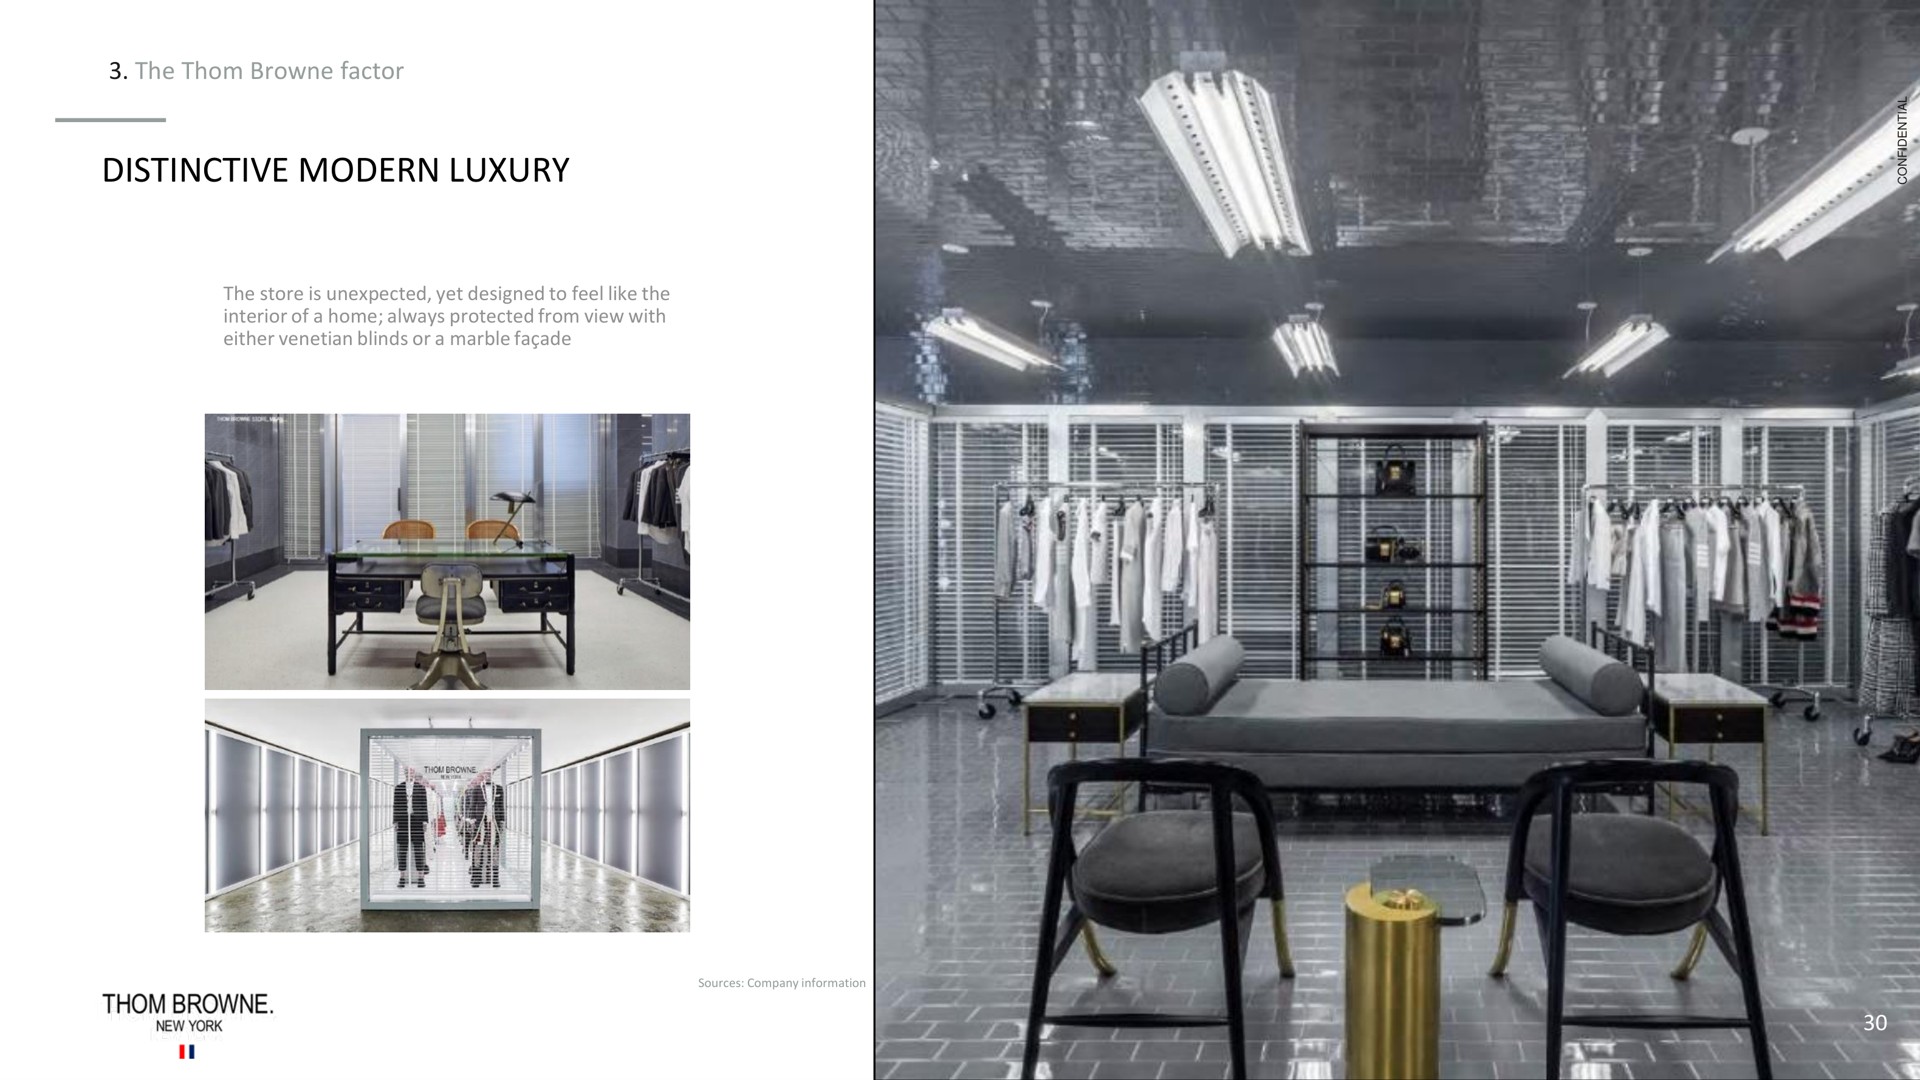 the factor distinctive modern luxury either blinds or a marble facade new york | Zegna